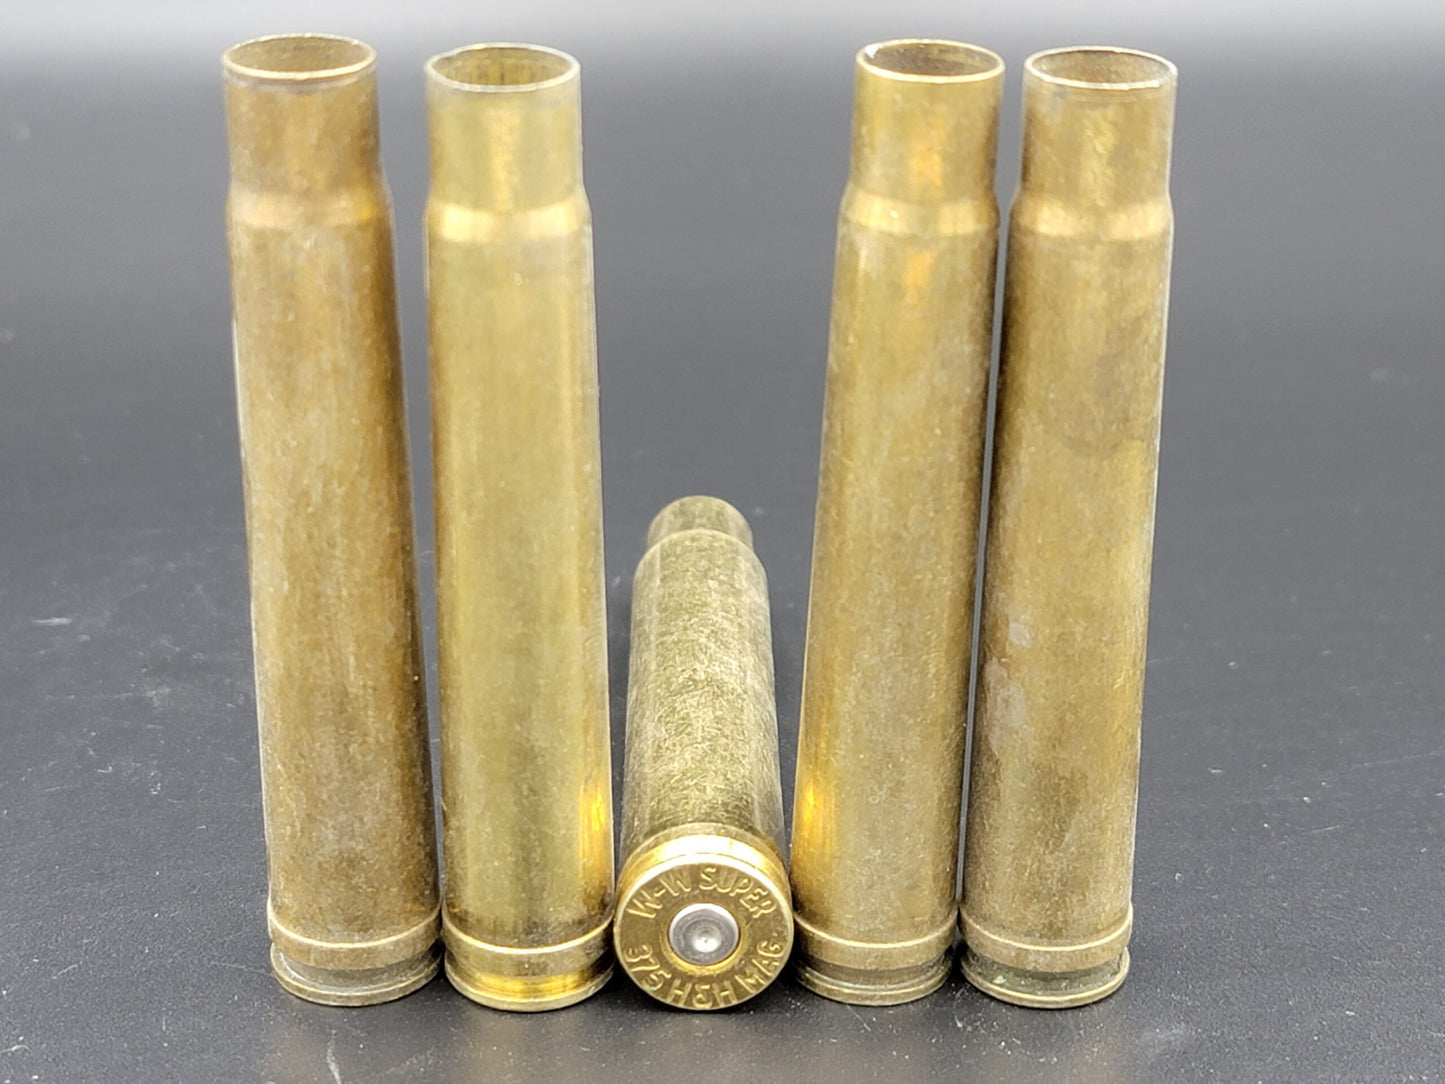 375 H&H Mag Rifle Brass | 25+ Casings